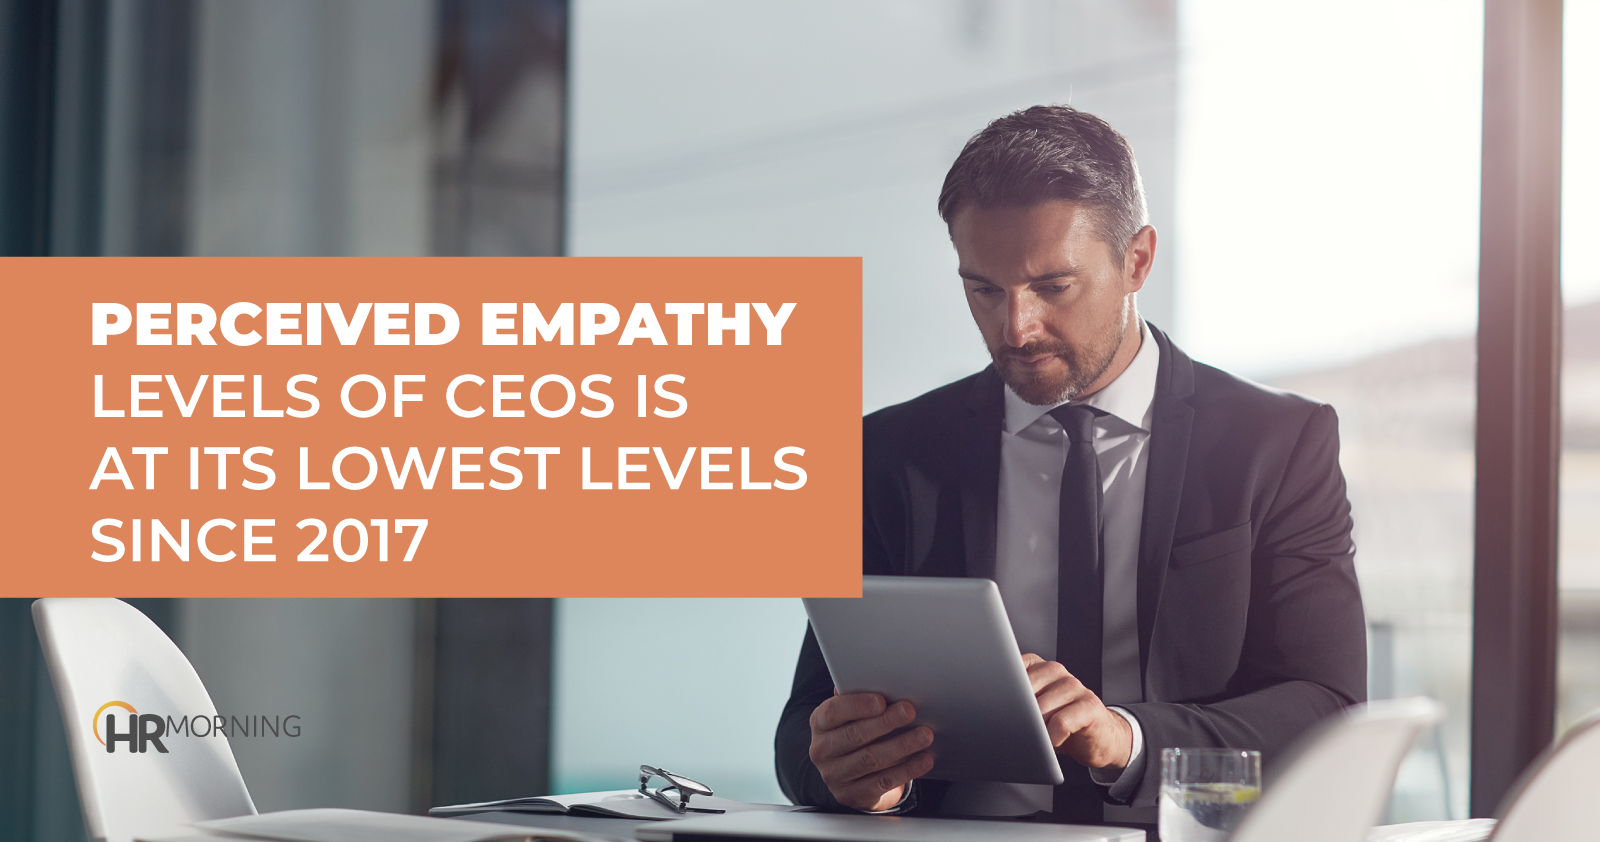 Perceived empathy levels of CEOs is at its lowest levels since 2017